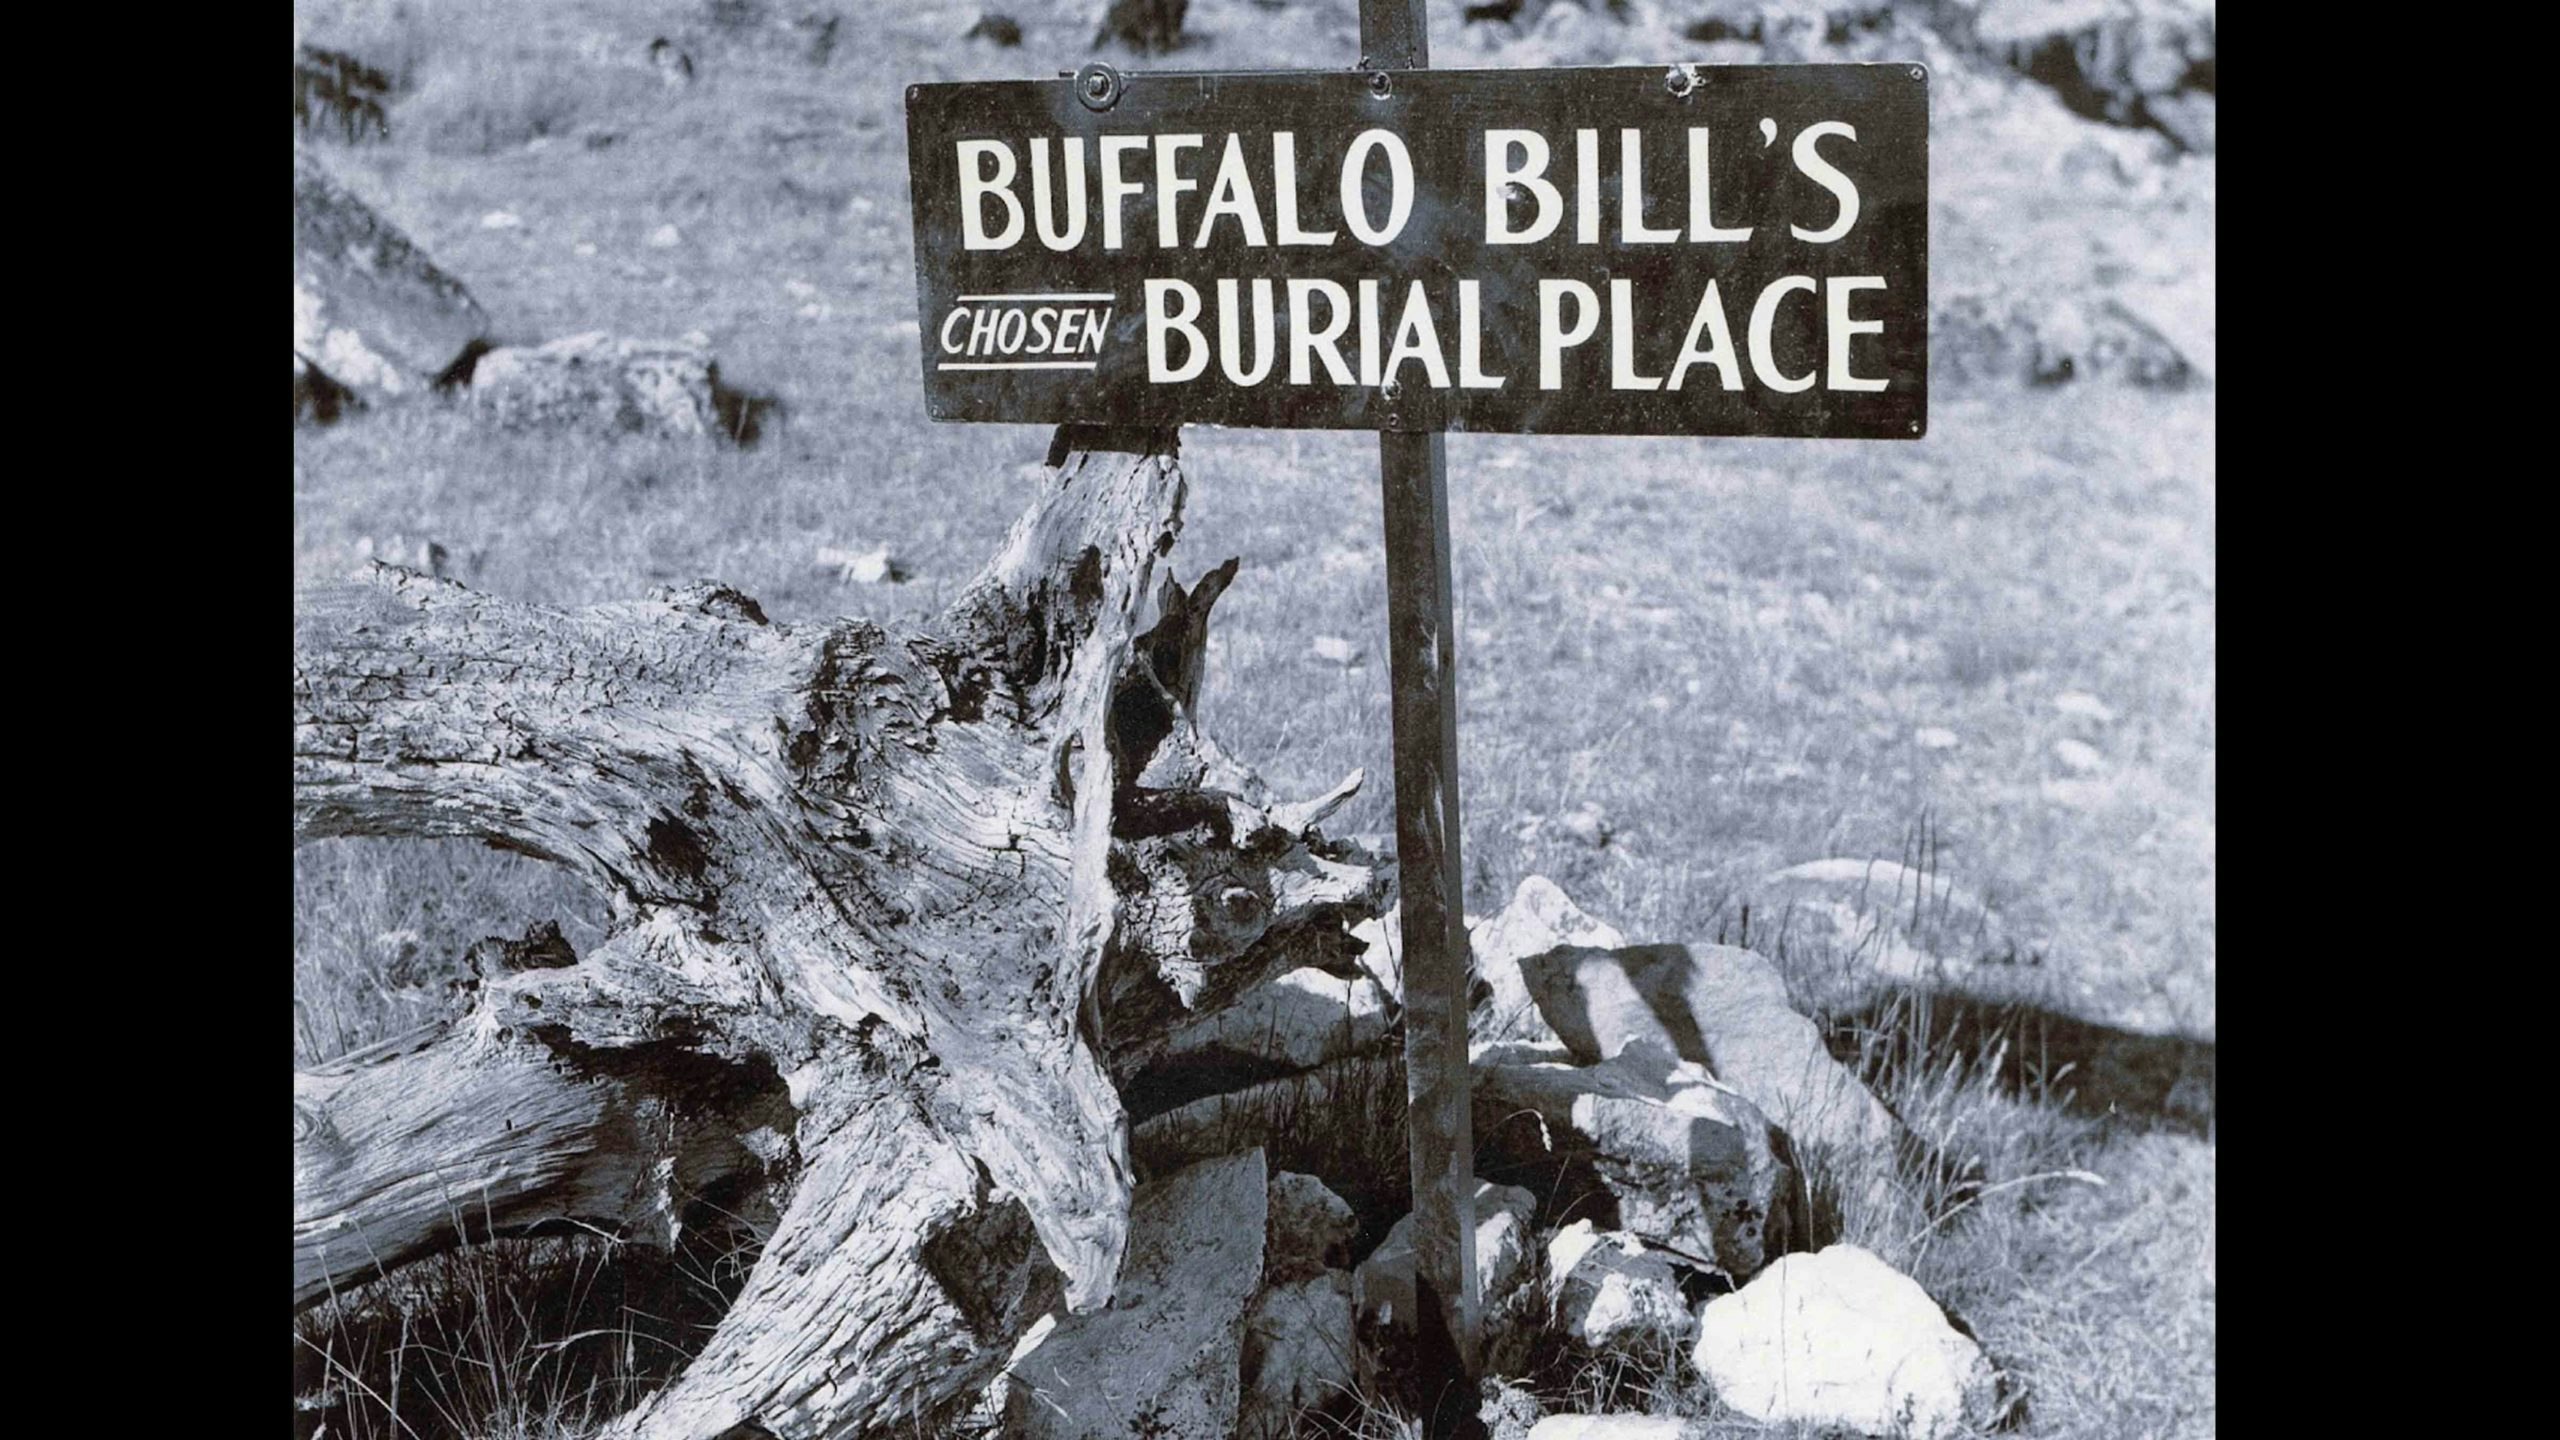 Buffalo Bill's Grave, Part 2: National Guard Called Out To Protect